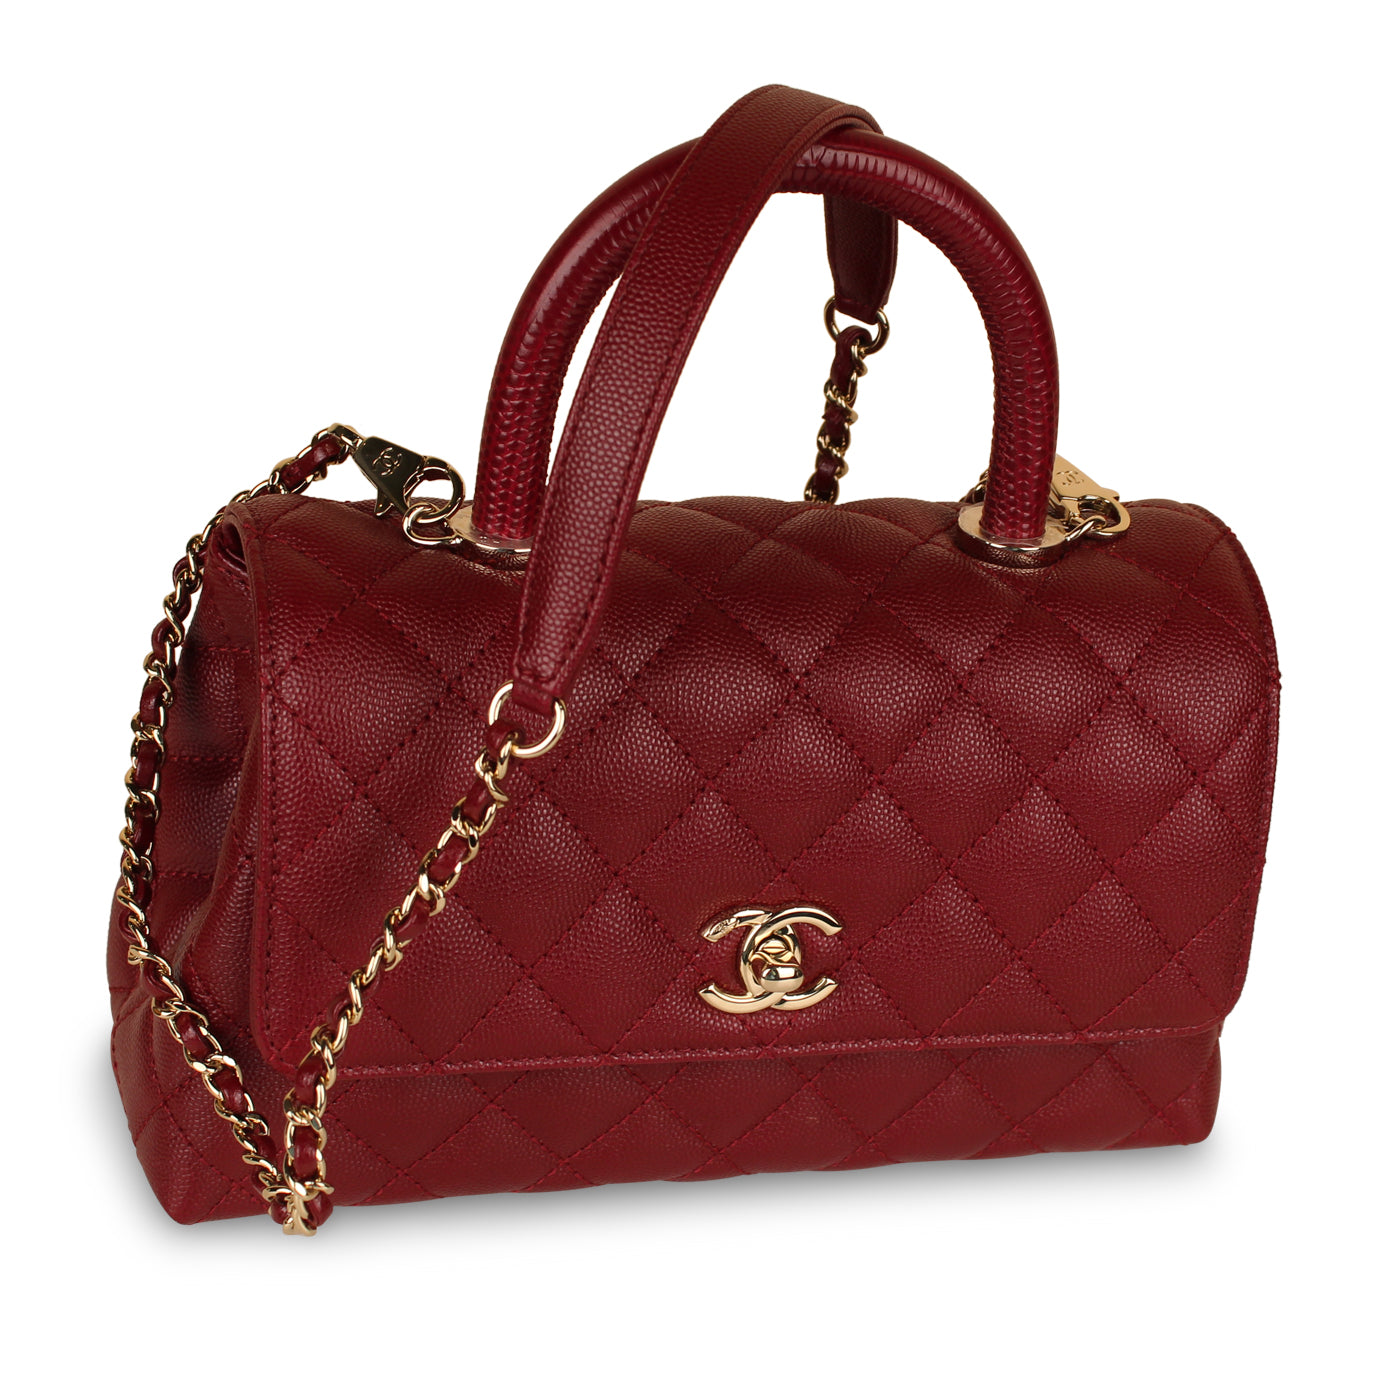 Coco handle leather handbag Chanel Red in Leather - 32162837